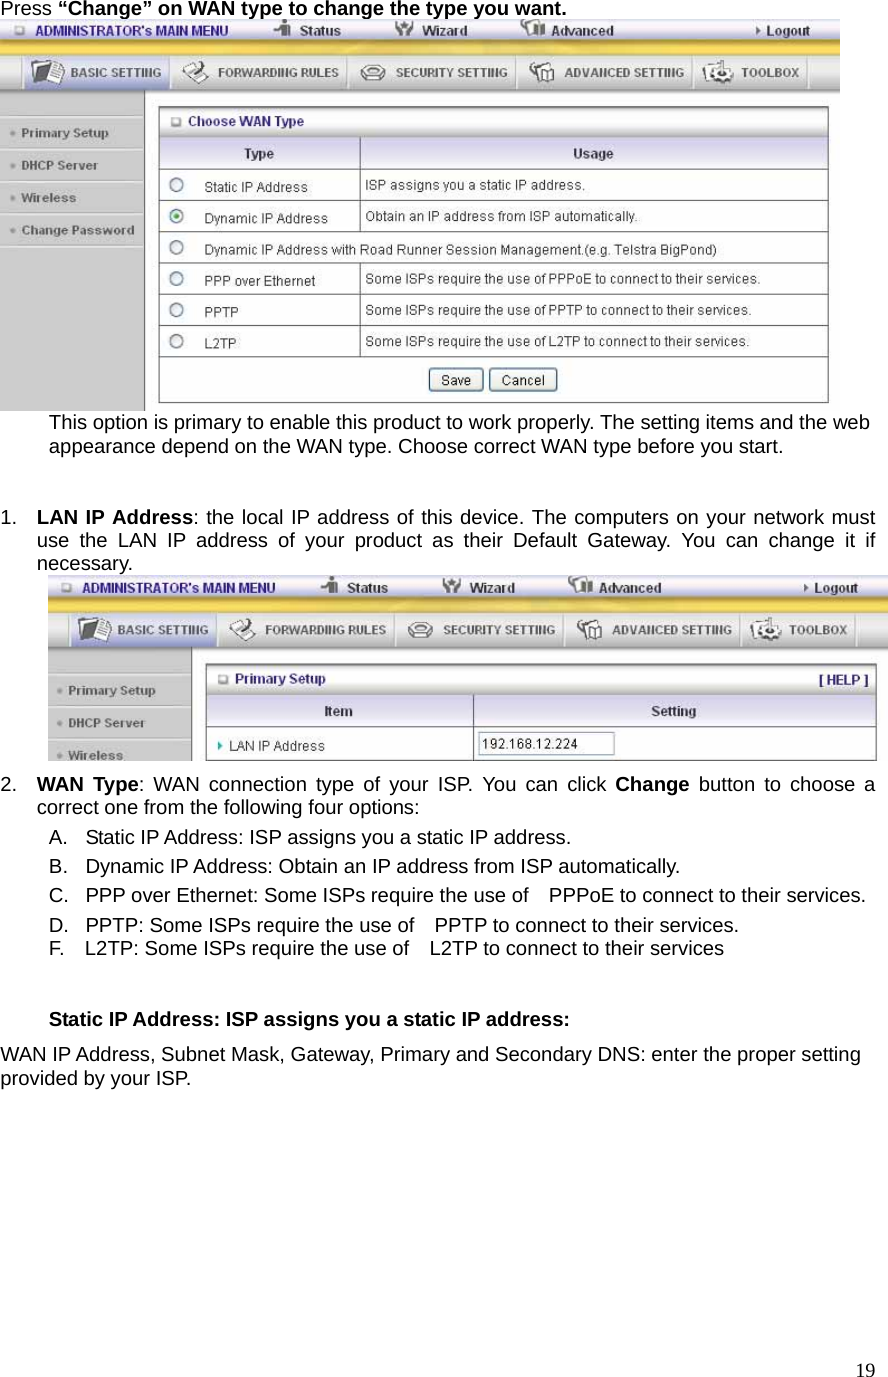  19Press “Change” on WAN type to change the type you want.  This option is primary to enable this product to work properly. The setting items and the web appearance depend on the WAN type. Choose correct WAN type before you start.  1.  LAN IP Address: the local IP address of this device. The computers on your network must use the LAN IP address of your product as their Default Gateway. You can change it if necessary.  2.  WAN Type: WAN connection type of your ISP. You can click Change button to choose a correct one from the following four options: A.  Static IP Address: ISP assigns you a static IP address. B.  Dynamic IP Address: Obtain an IP address from ISP automatically. C.  PPP over Ethernet: Some ISPs require the use of    PPPoE to connect to their services. D.  PPTP: Some ISPs require the use of    PPTP to connect to their services. F.    L2TP: Some ISPs require the use of    L2TP to connect to their services  Static IP Address: ISP assigns you a static IP address: WAN IP Address, Subnet Mask, Gateway, Primary and Secondary DNS: enter the proper setting provided by your ISP. 